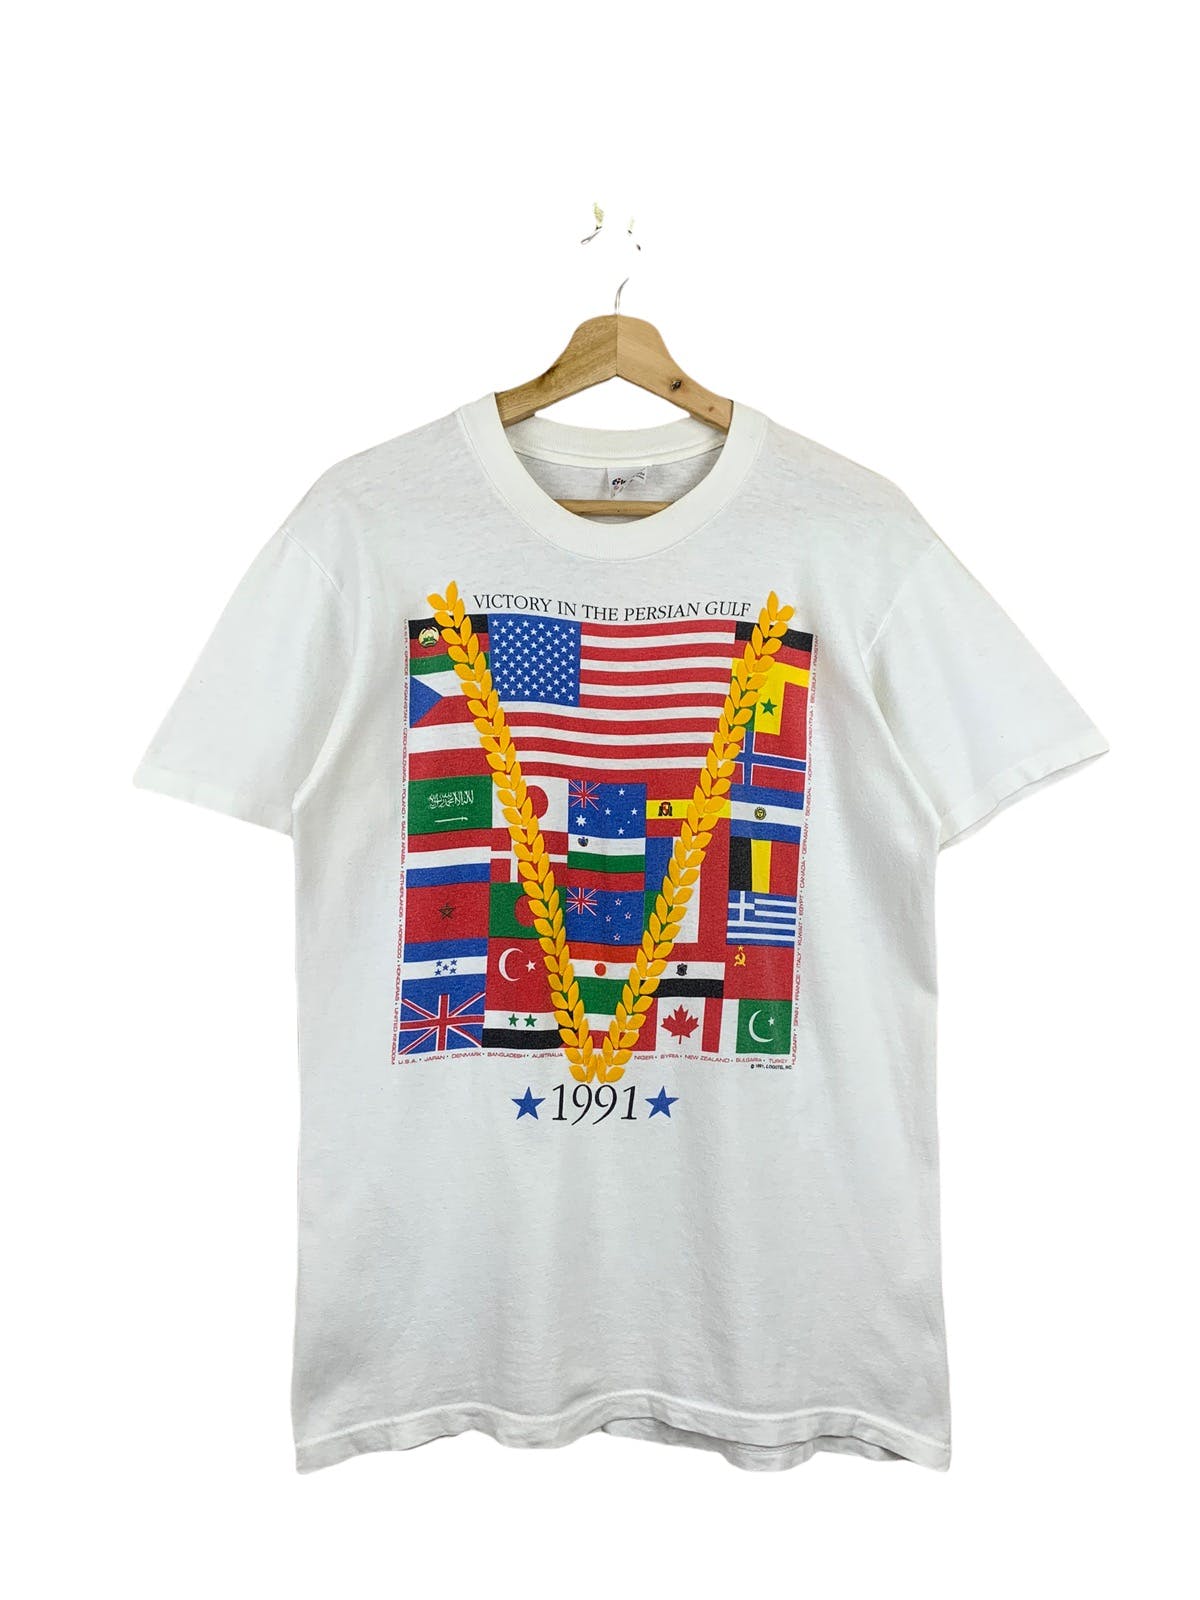 🔥VINTAGE 1991 VICTORY IN THE PERSIAN GULF WHITE T-SHIRT - 1